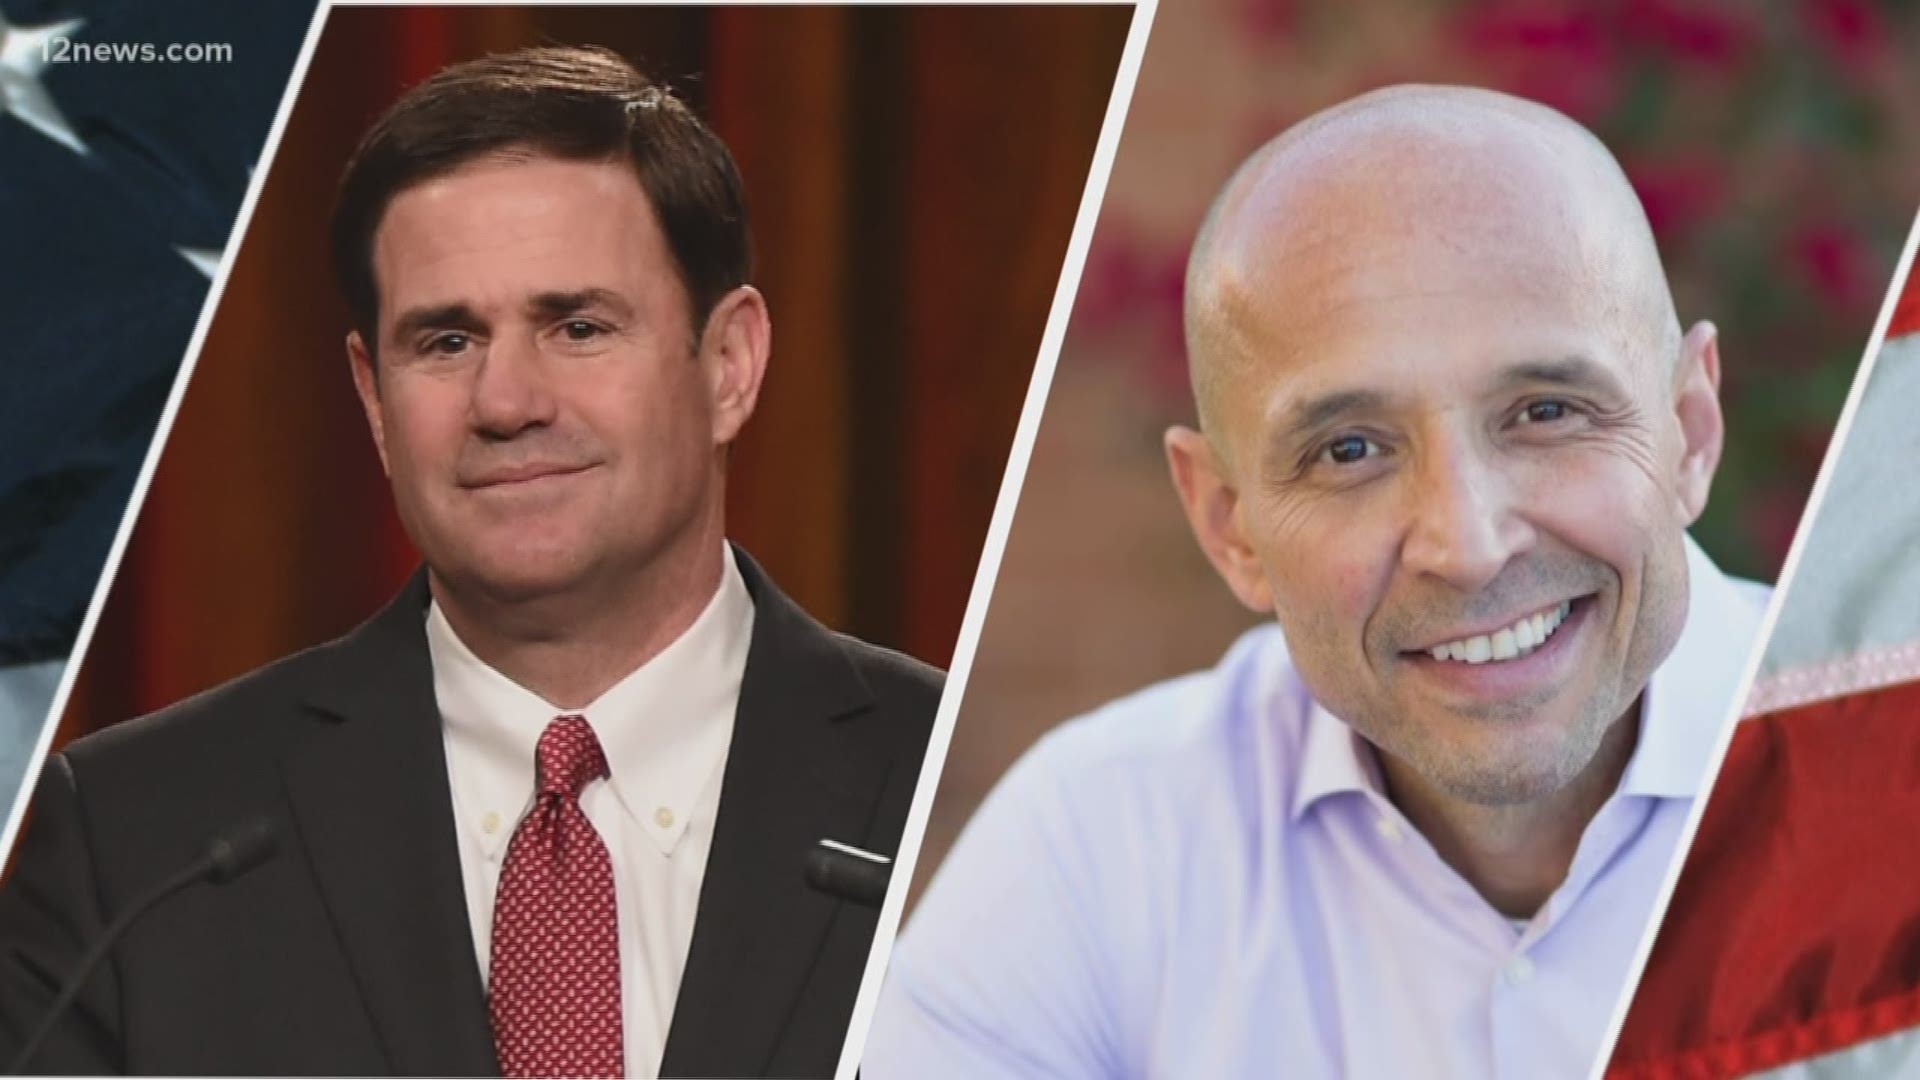 Tonight Governor Ducey and opponent David Garcia go head-to-heard in a debate. We give you a preview of both candidates.